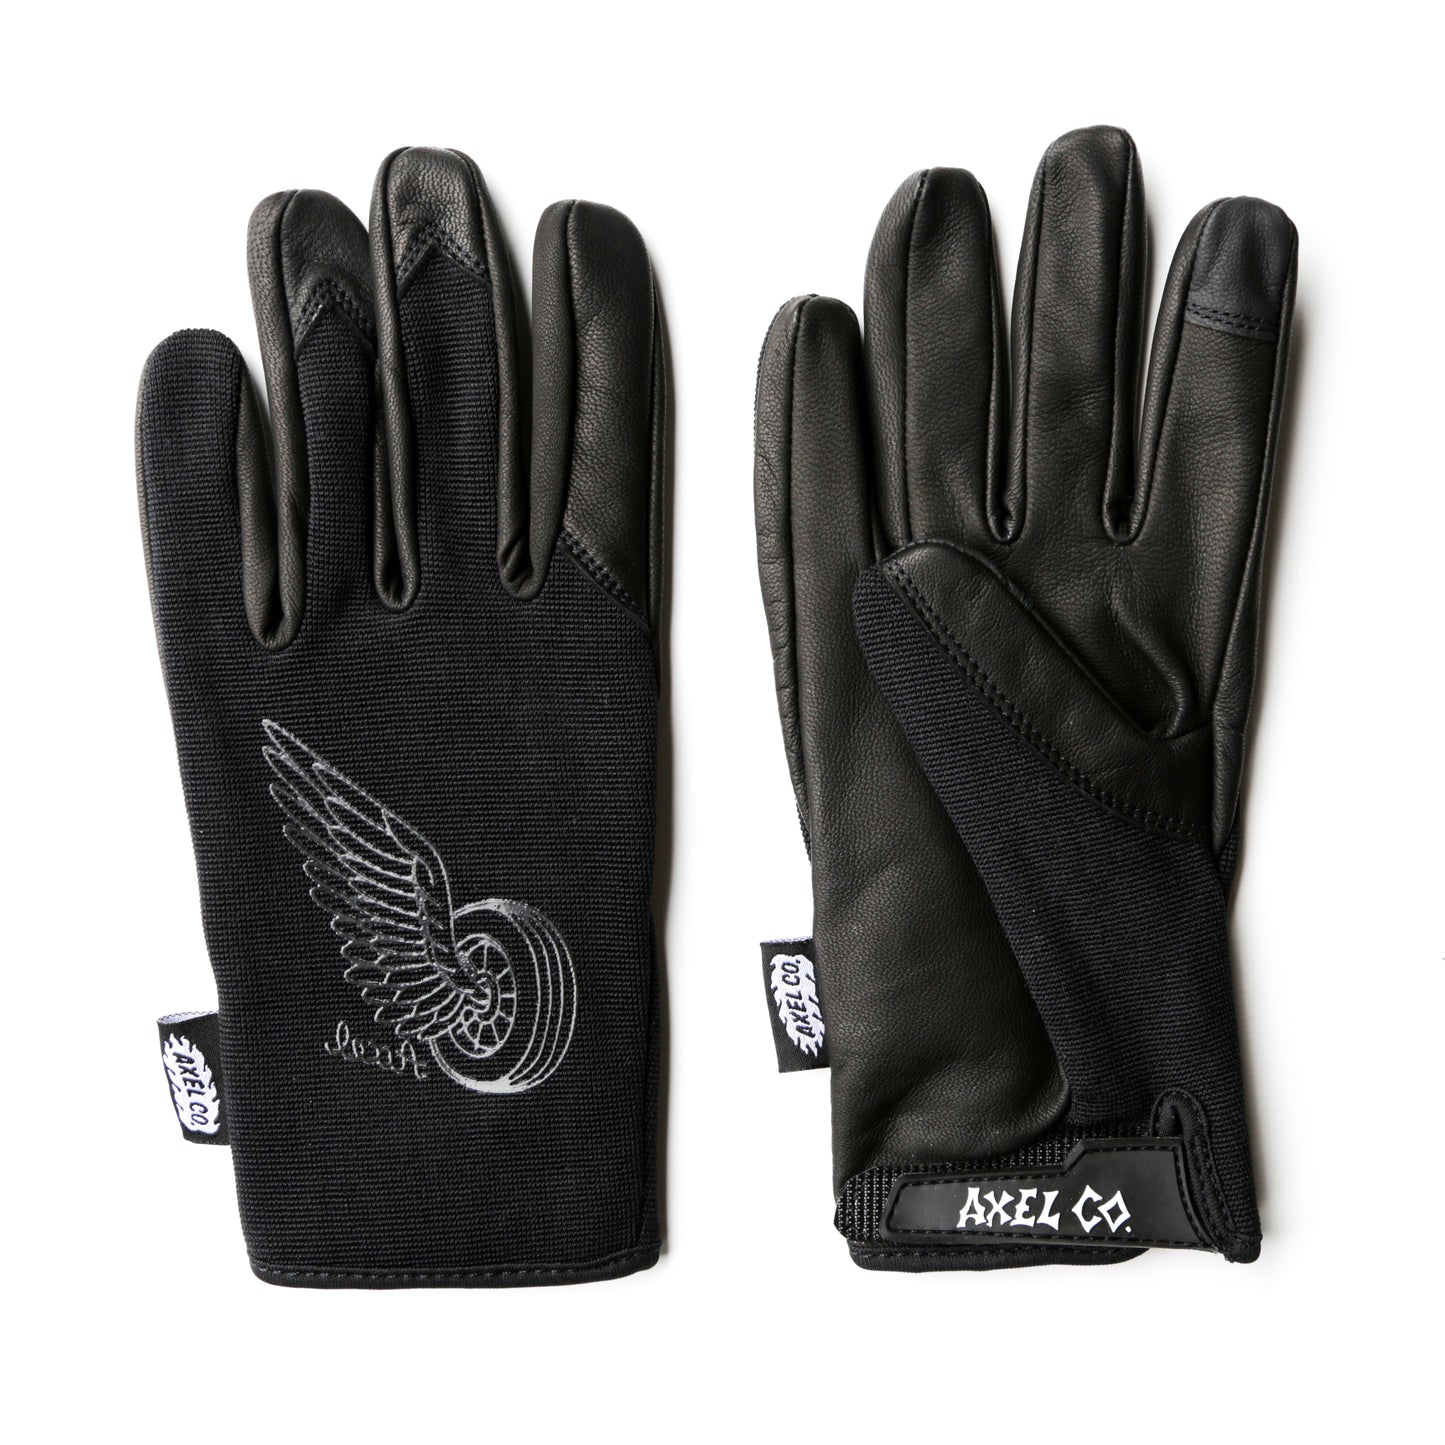 Axel Co Mesh Top Motorcycle Gloves